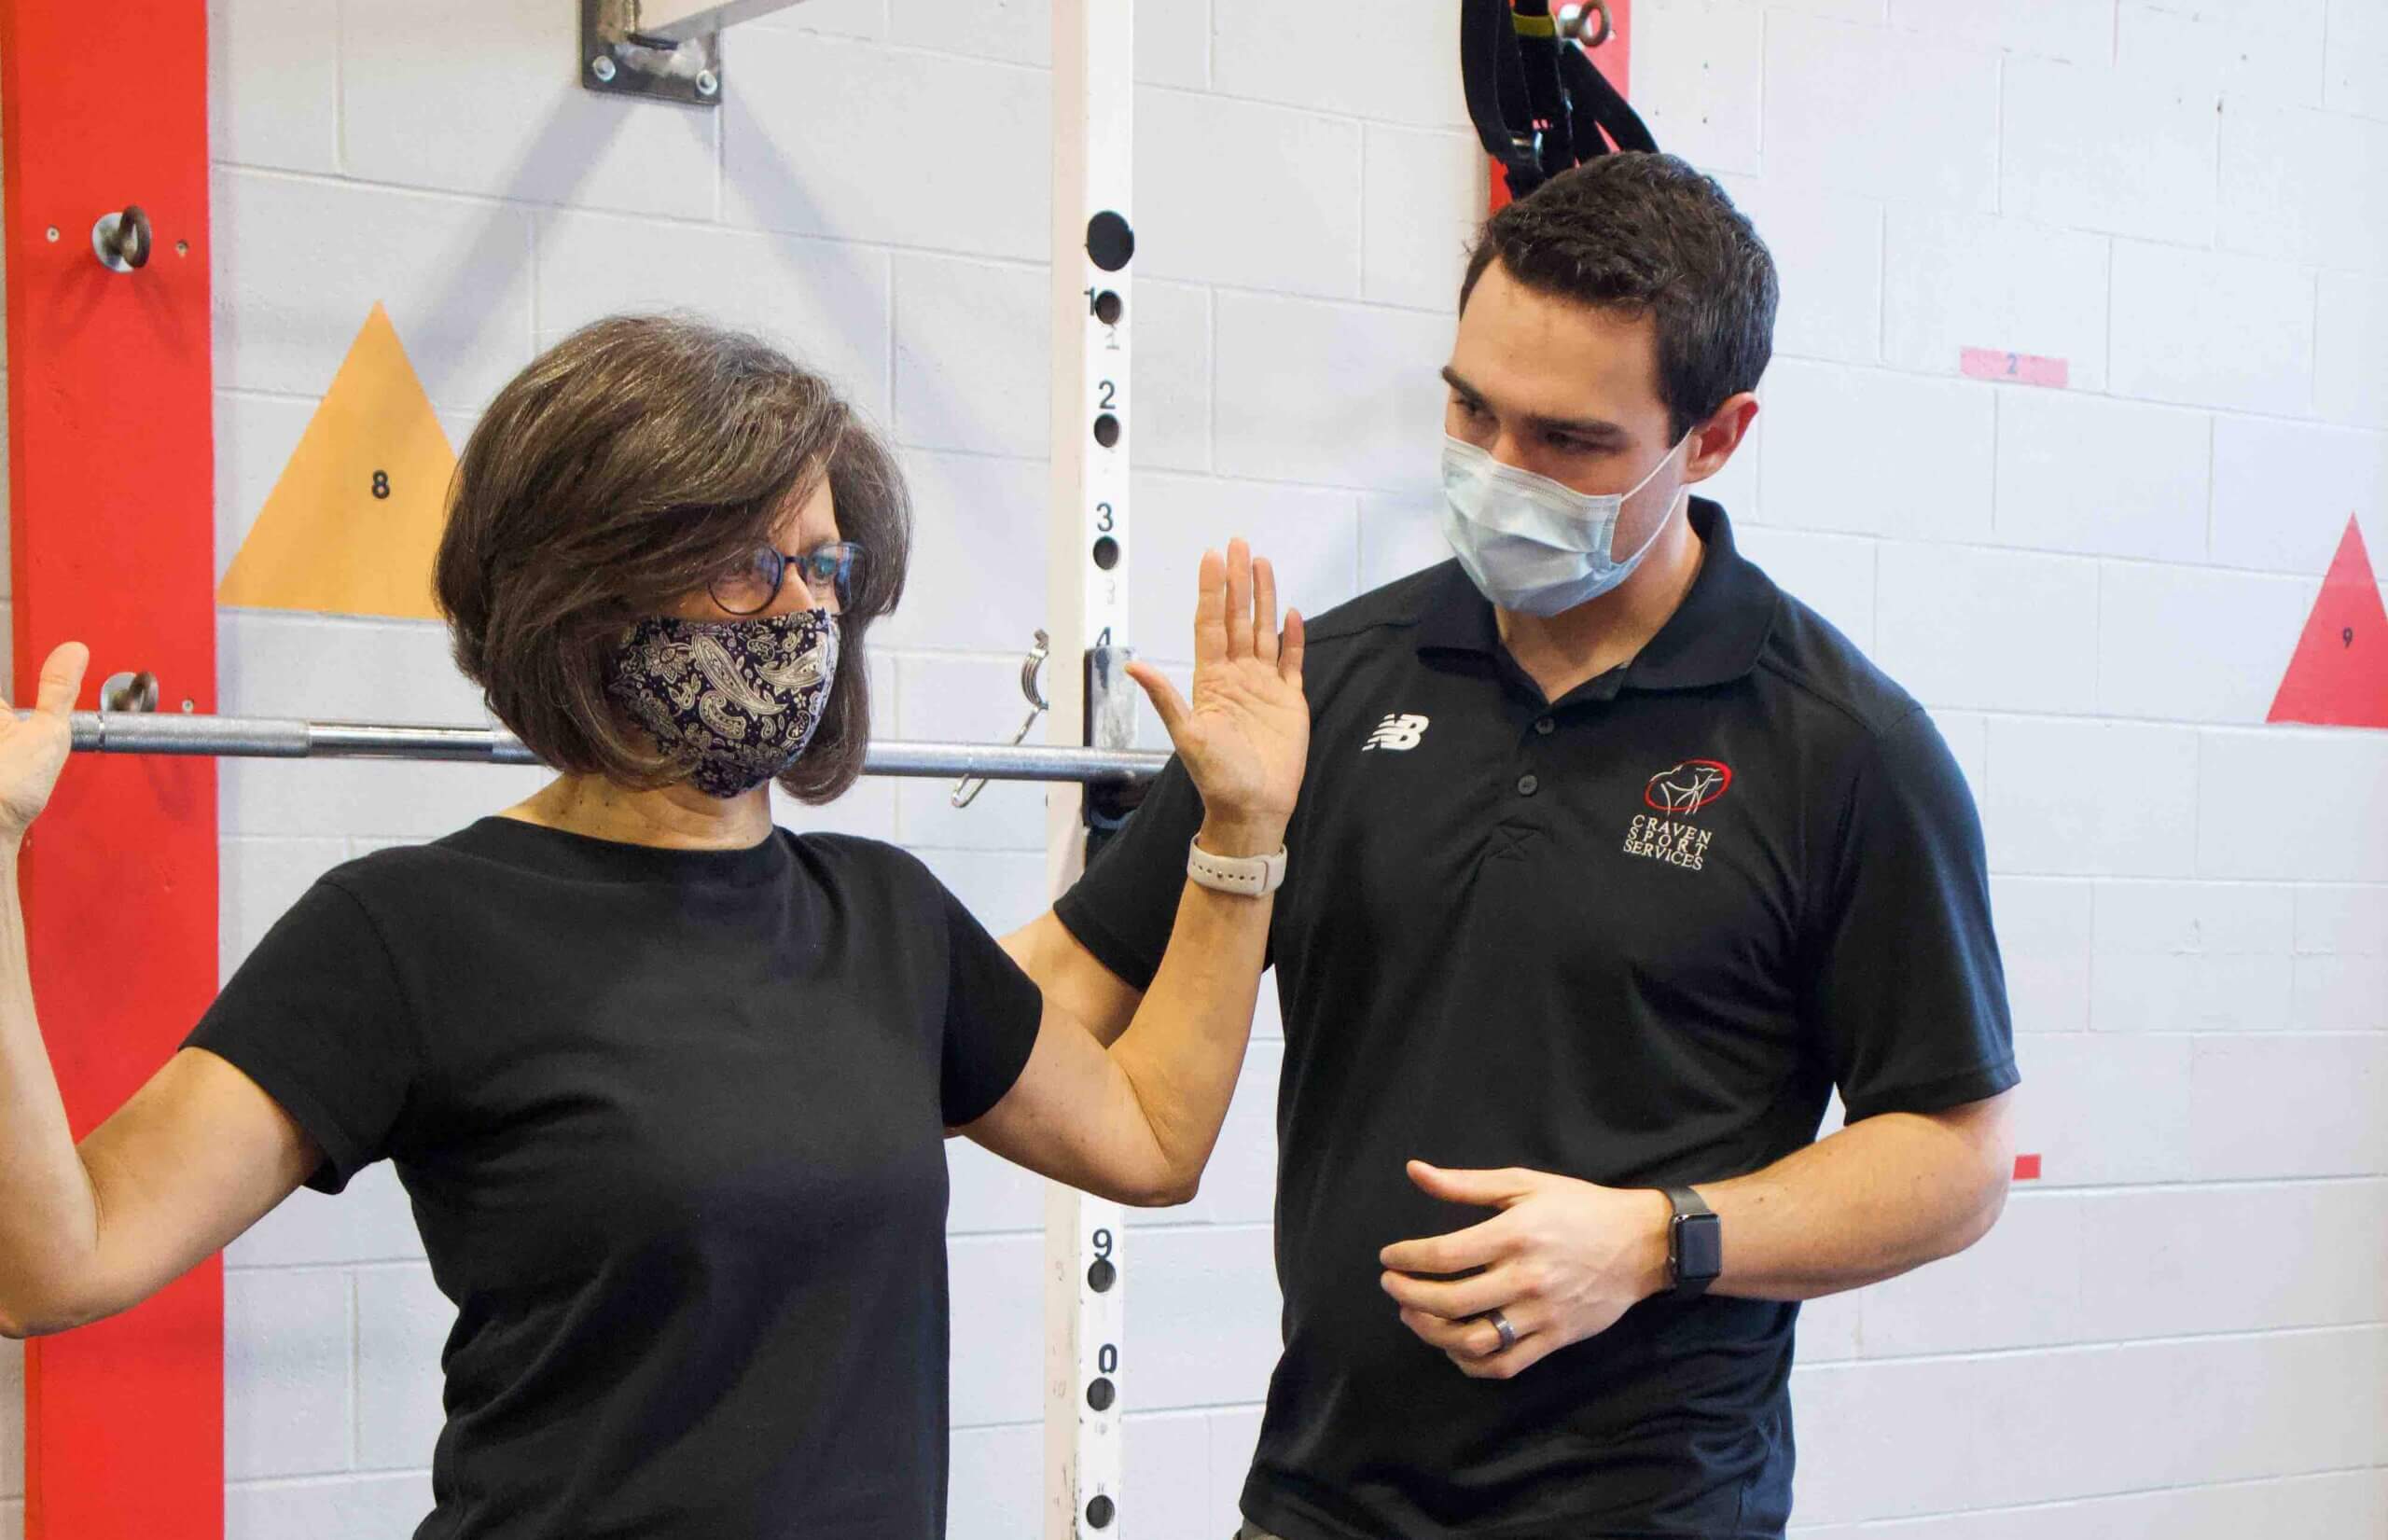 Craven SPORT services thrives to create a safe and comfortable environment for physiotherapy and training in the midst of the COVID-19 pandemic.